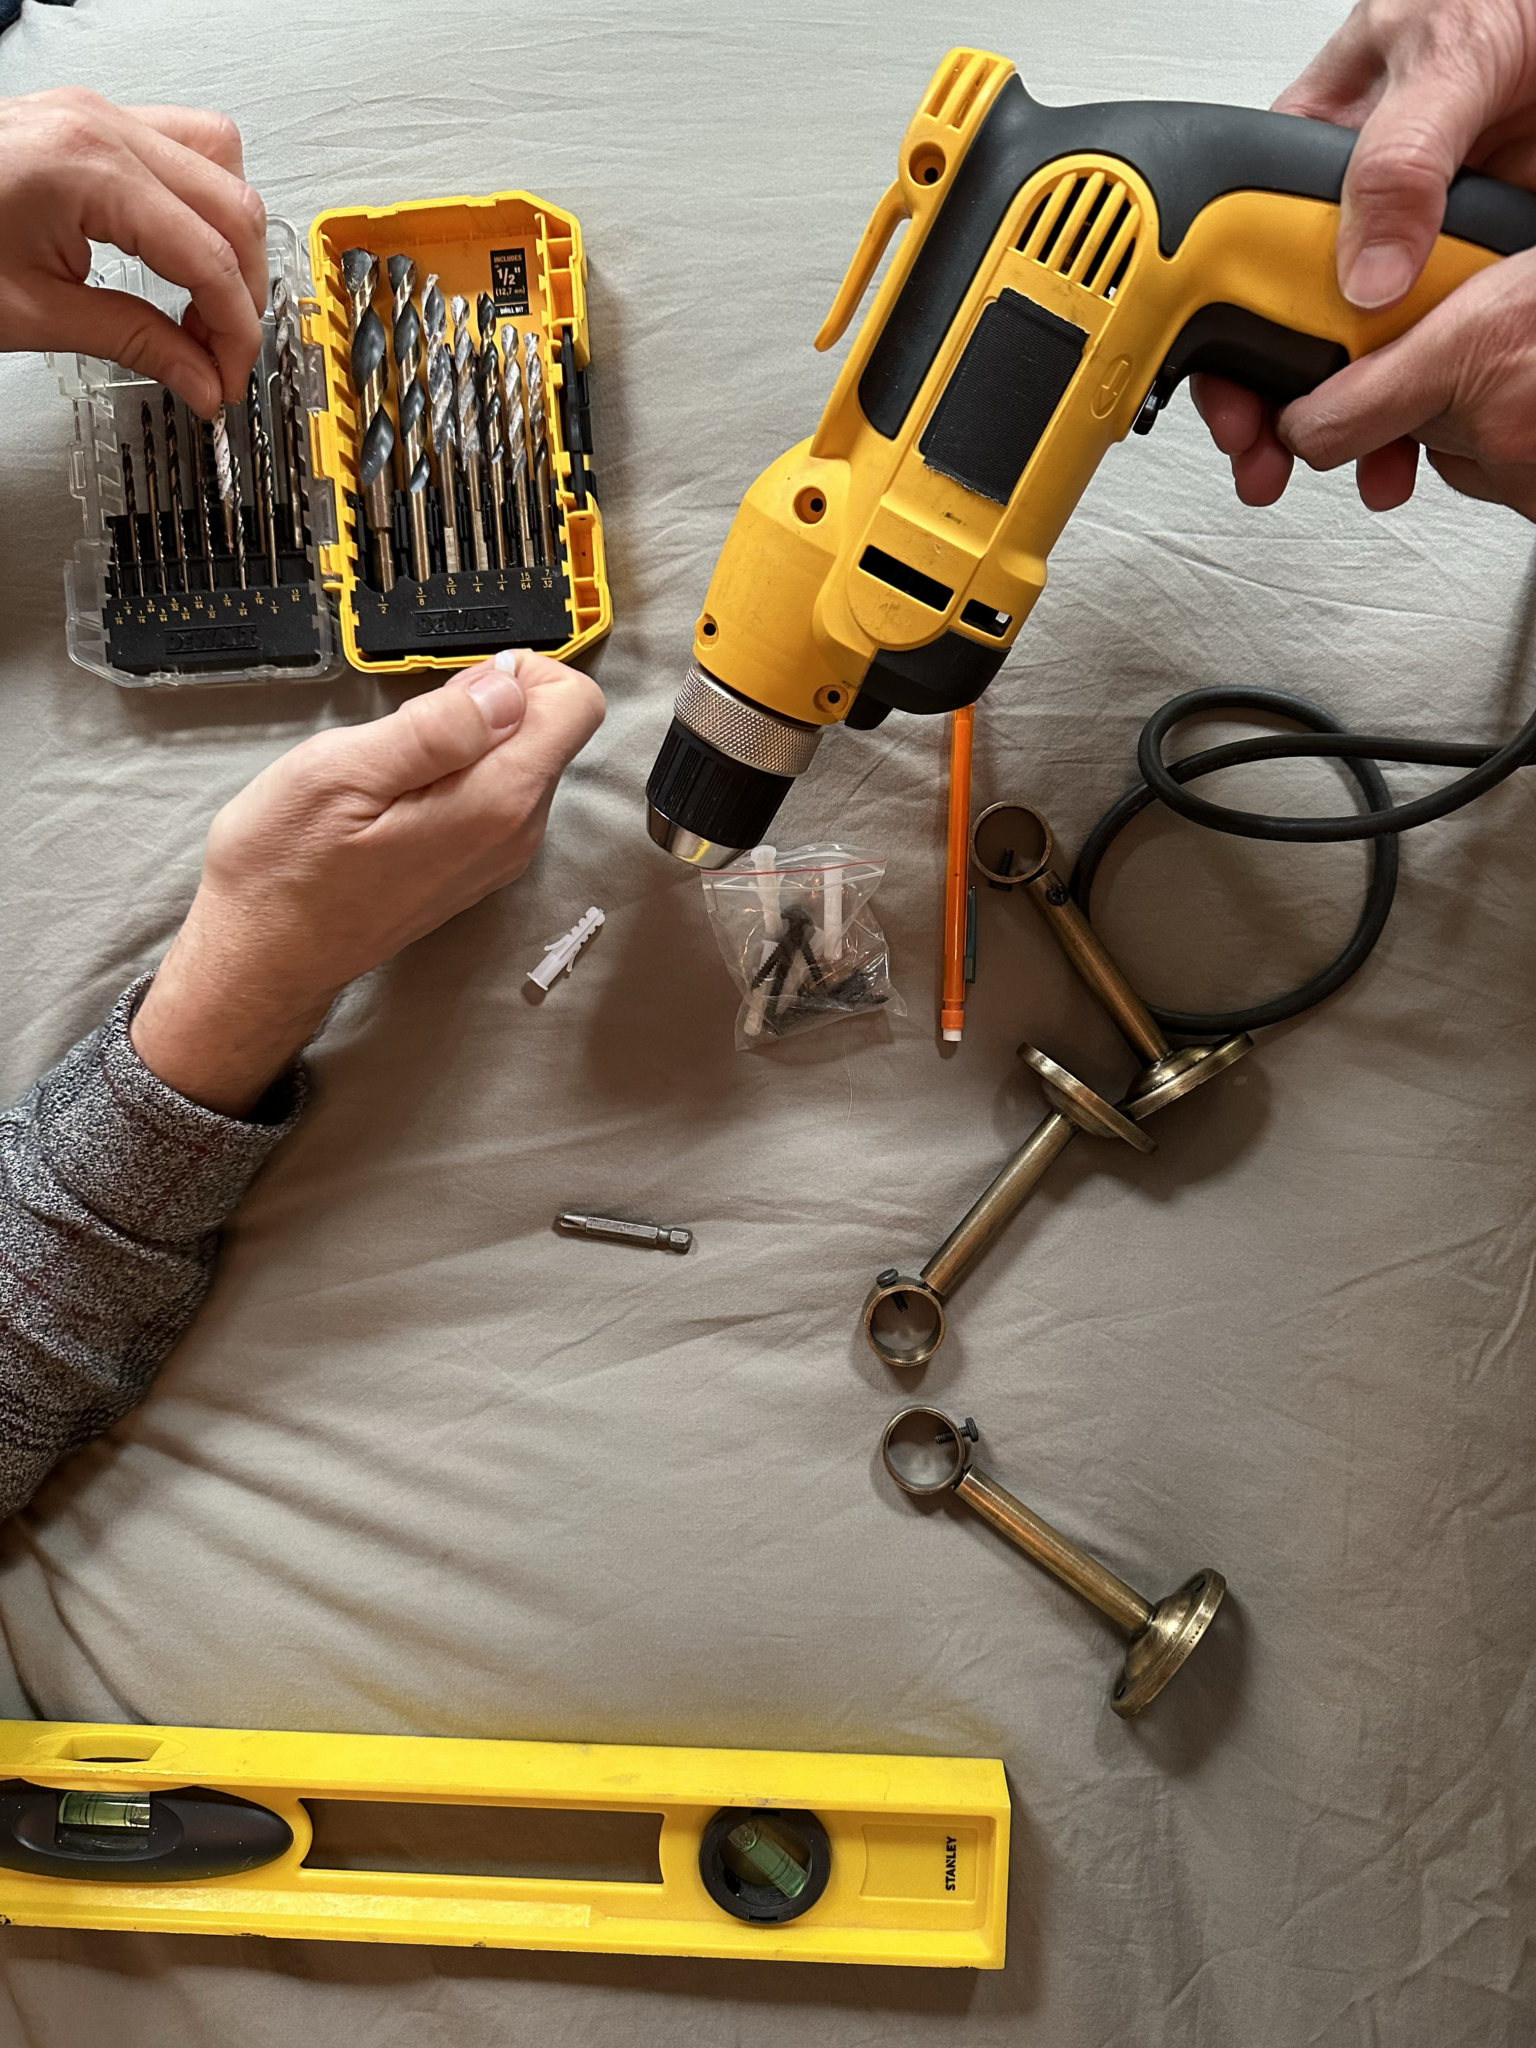 A yellow spirit level partially extends into the bottom left of the photo. Curtain installation hardware, drill bits, a pencil and a drill lay on a light gray sheet on a bed. In the top left, a hand is going through a container of drill bits. In the top right, another hand from another person holds a yellow drill.